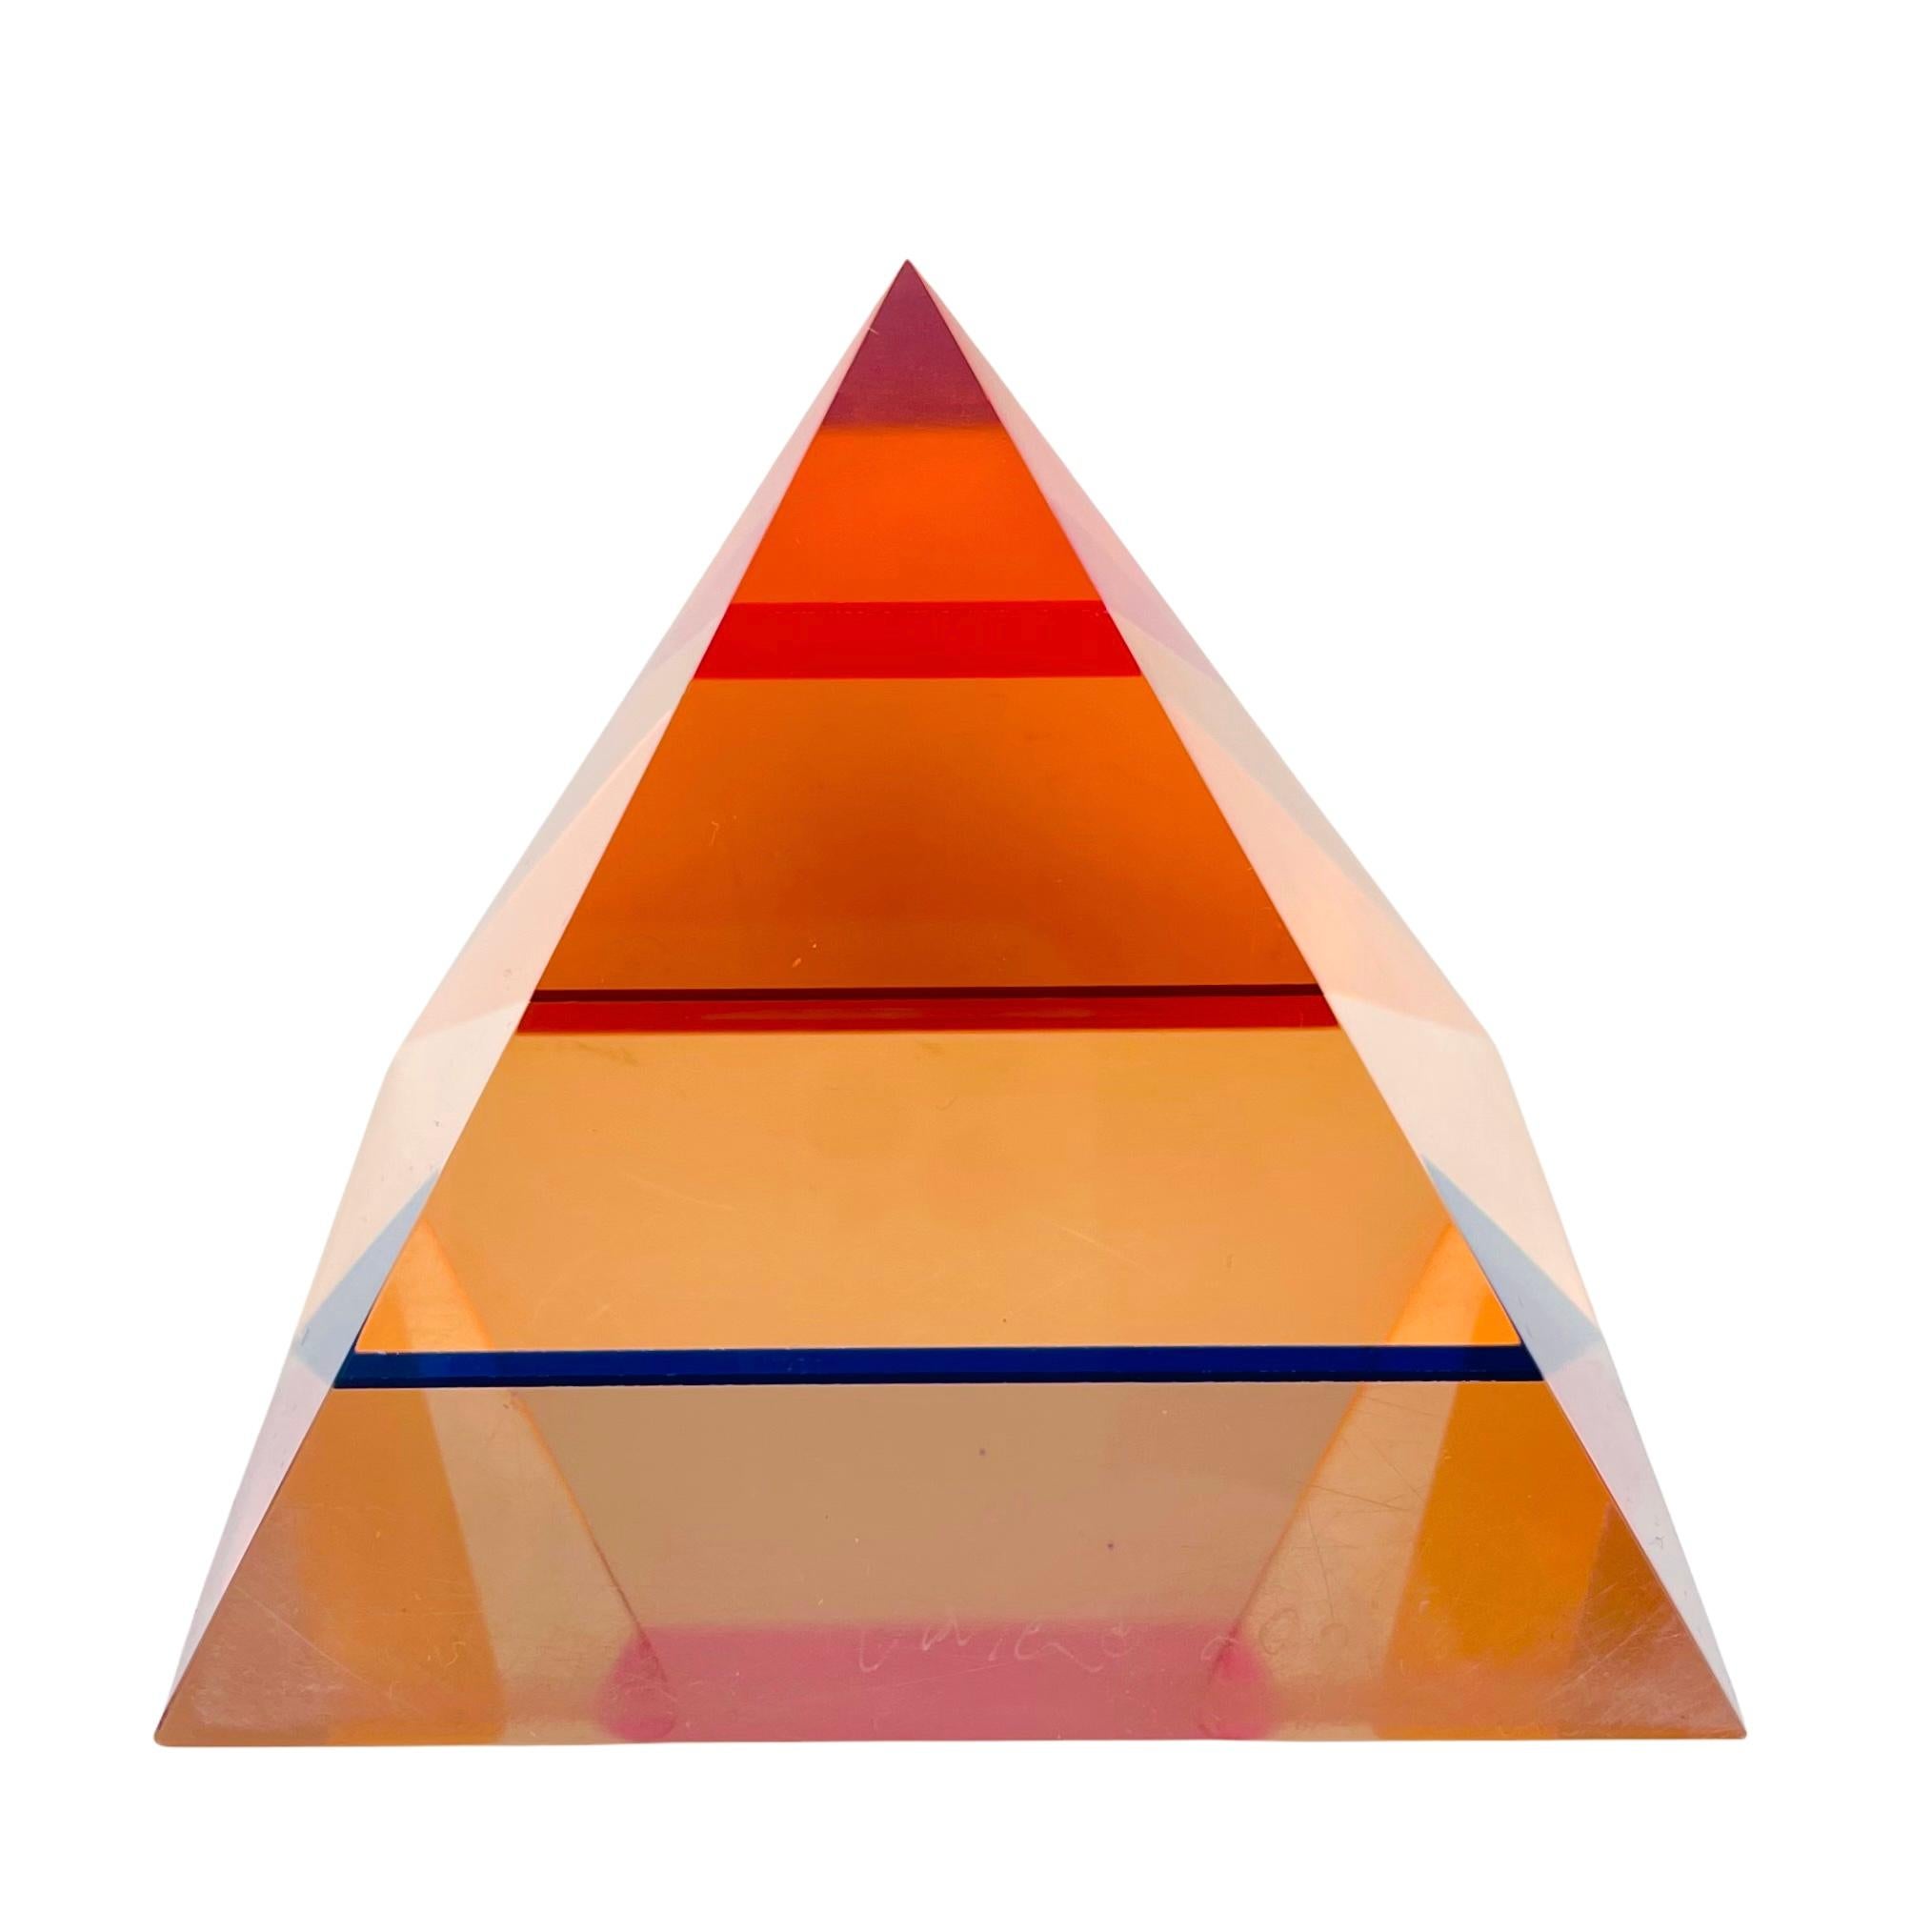 American Op Art Acrylic Sunburst Pyramid Sculpture by Vasa Mihich For Sale